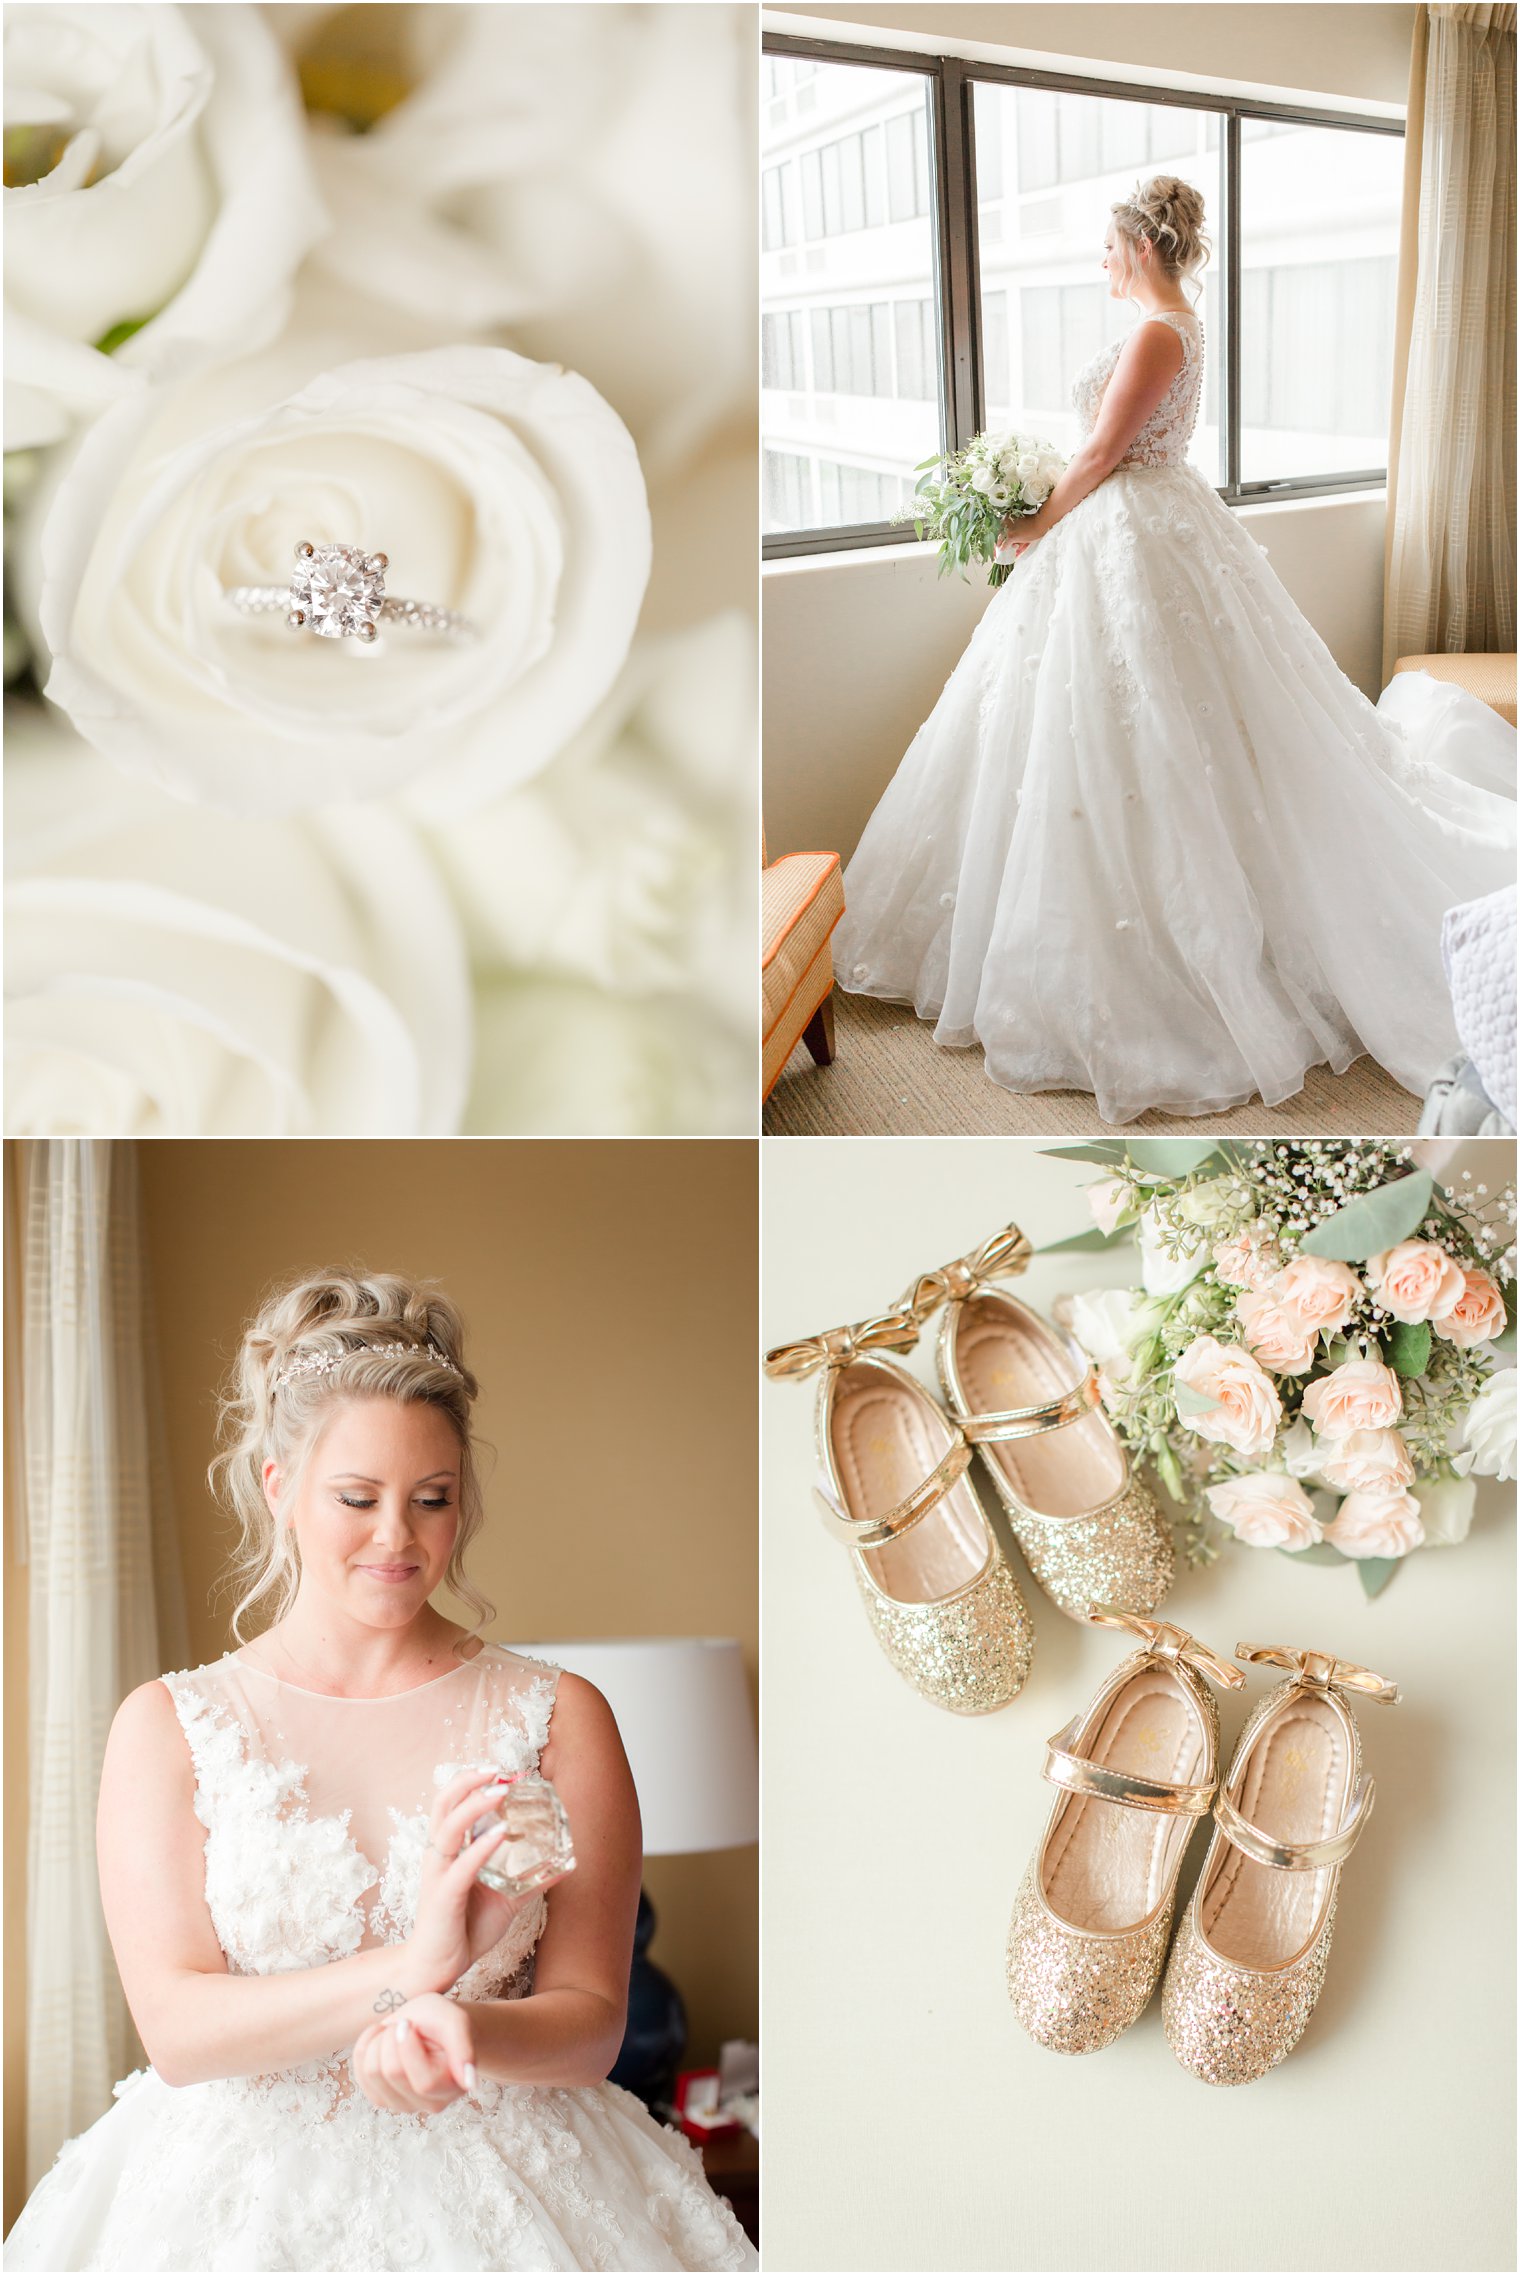 Summer bride in Morilee wedding gown before Legacy Castle wedding day photographed by Idalia Photography